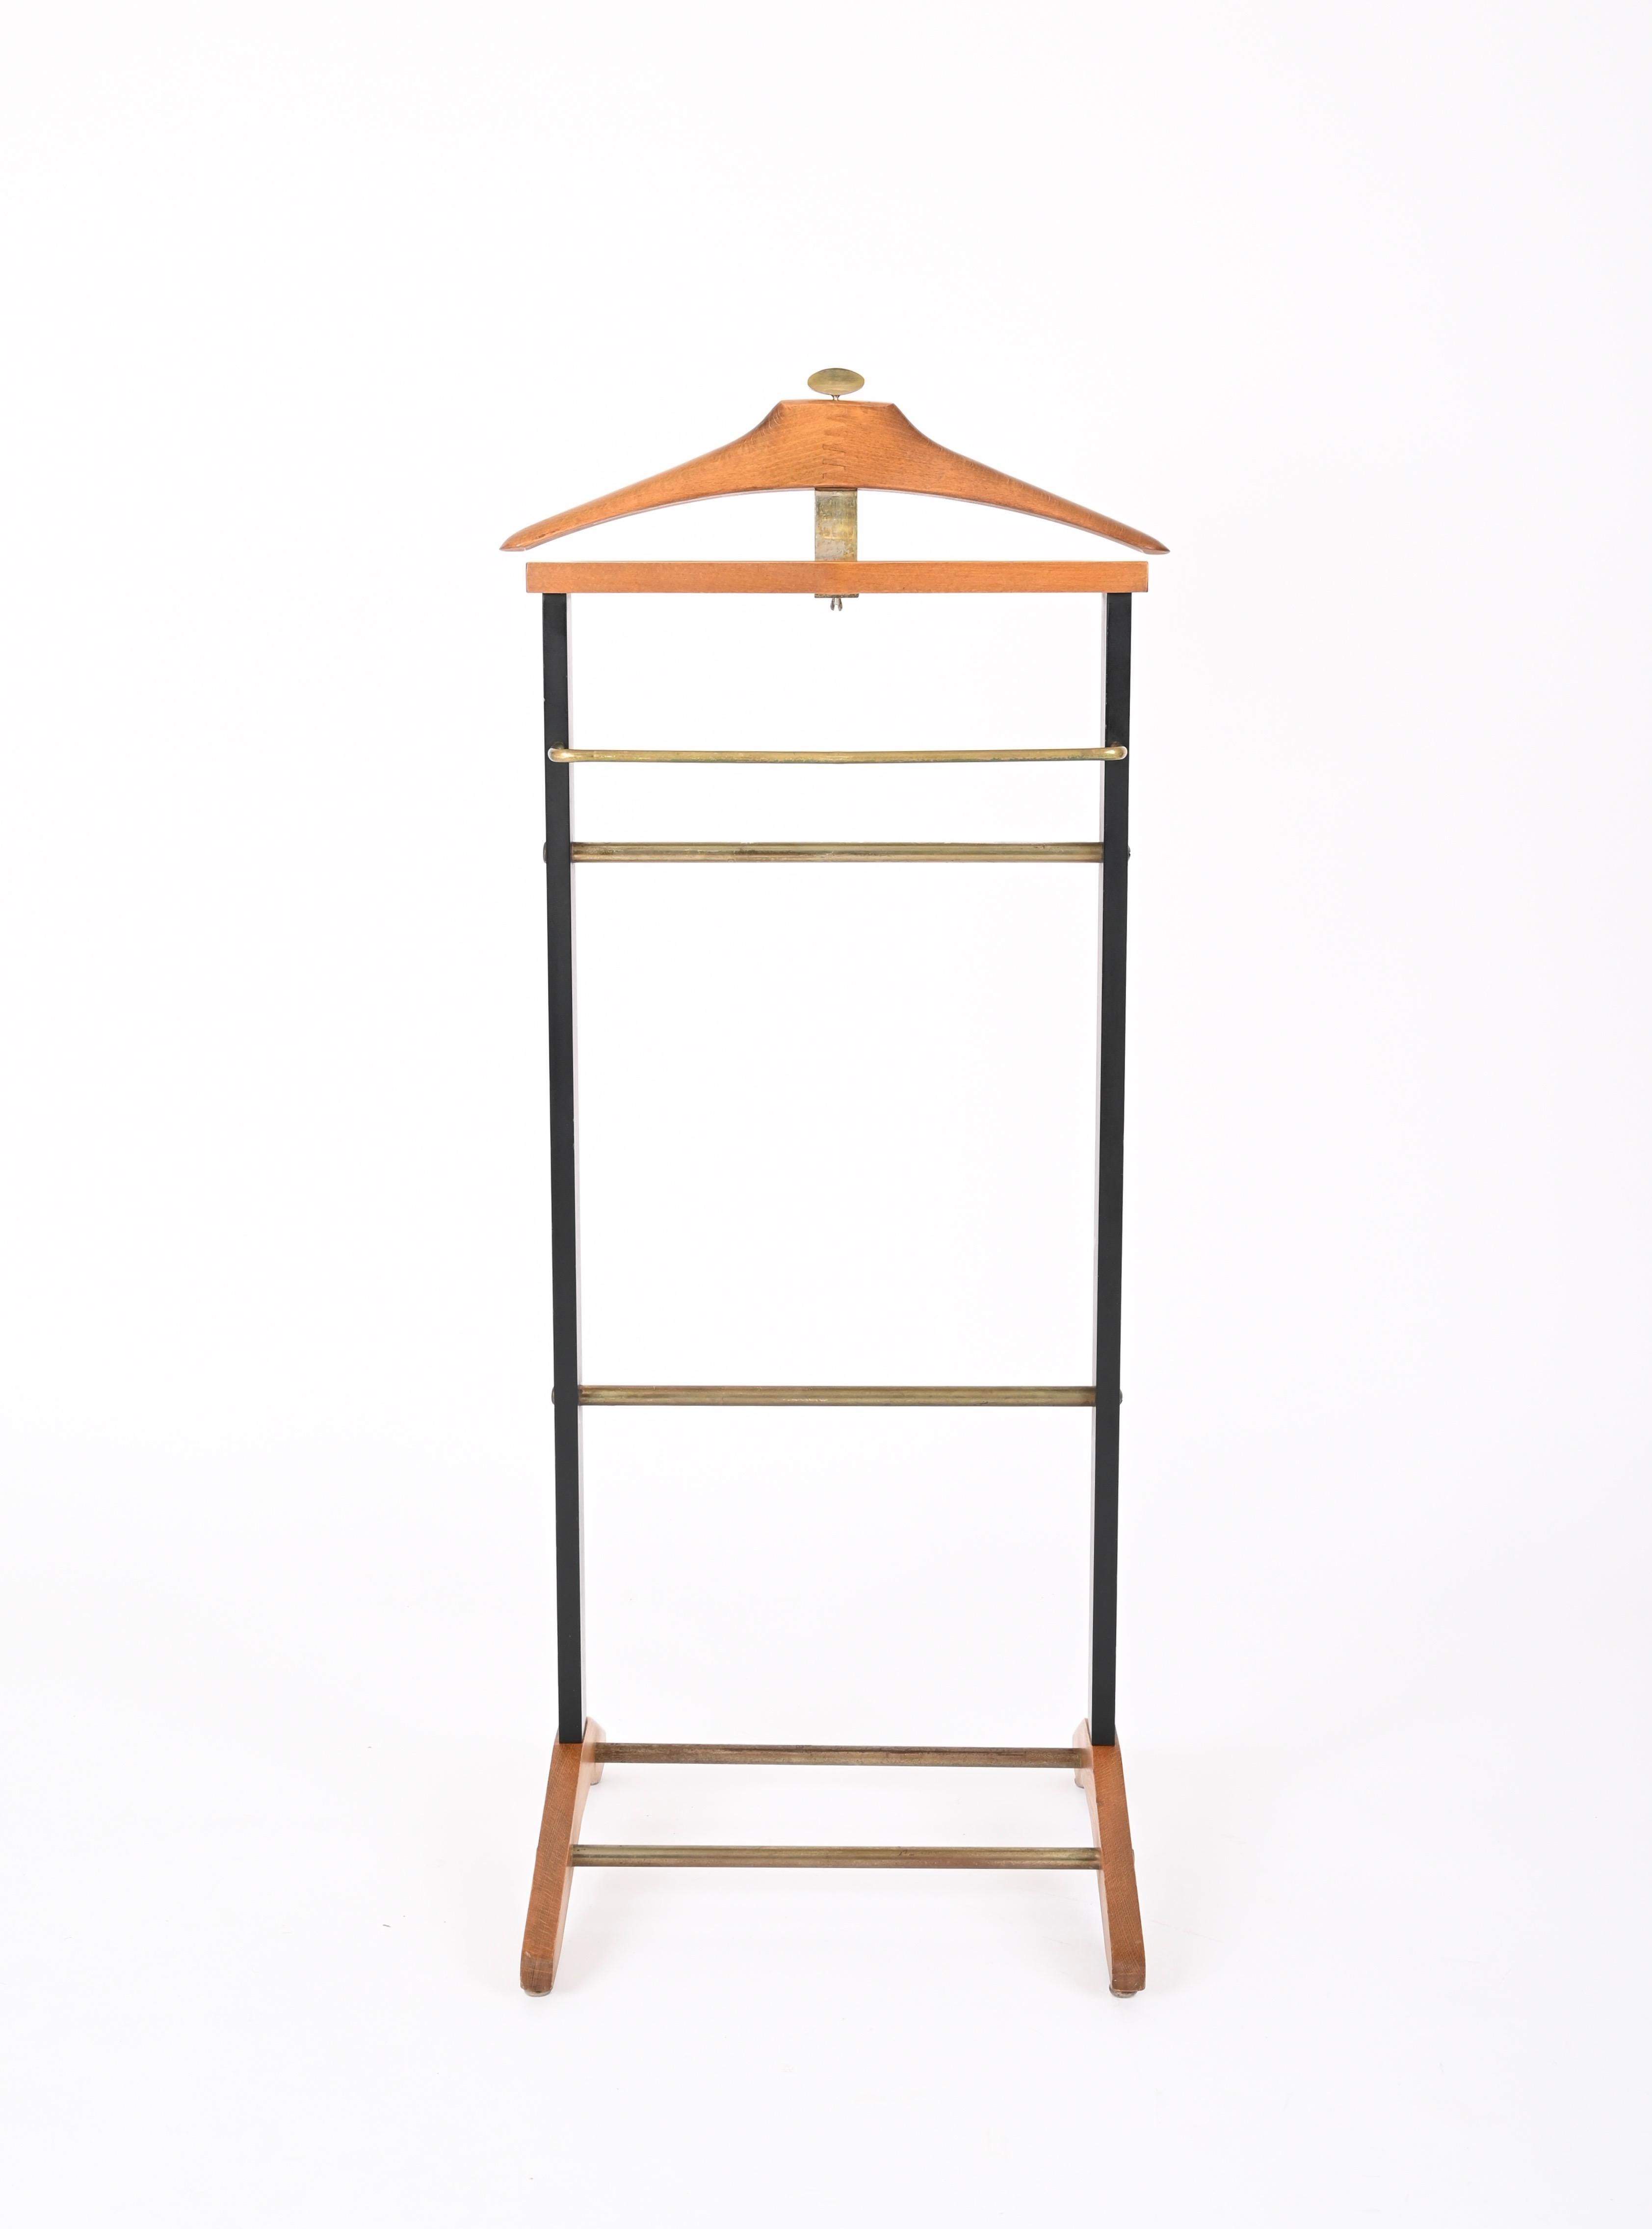 Metal Ico Parisi Valet Beech and Brass Coat Stand for Fratelli Reguitti, Italy 1960s For Sale